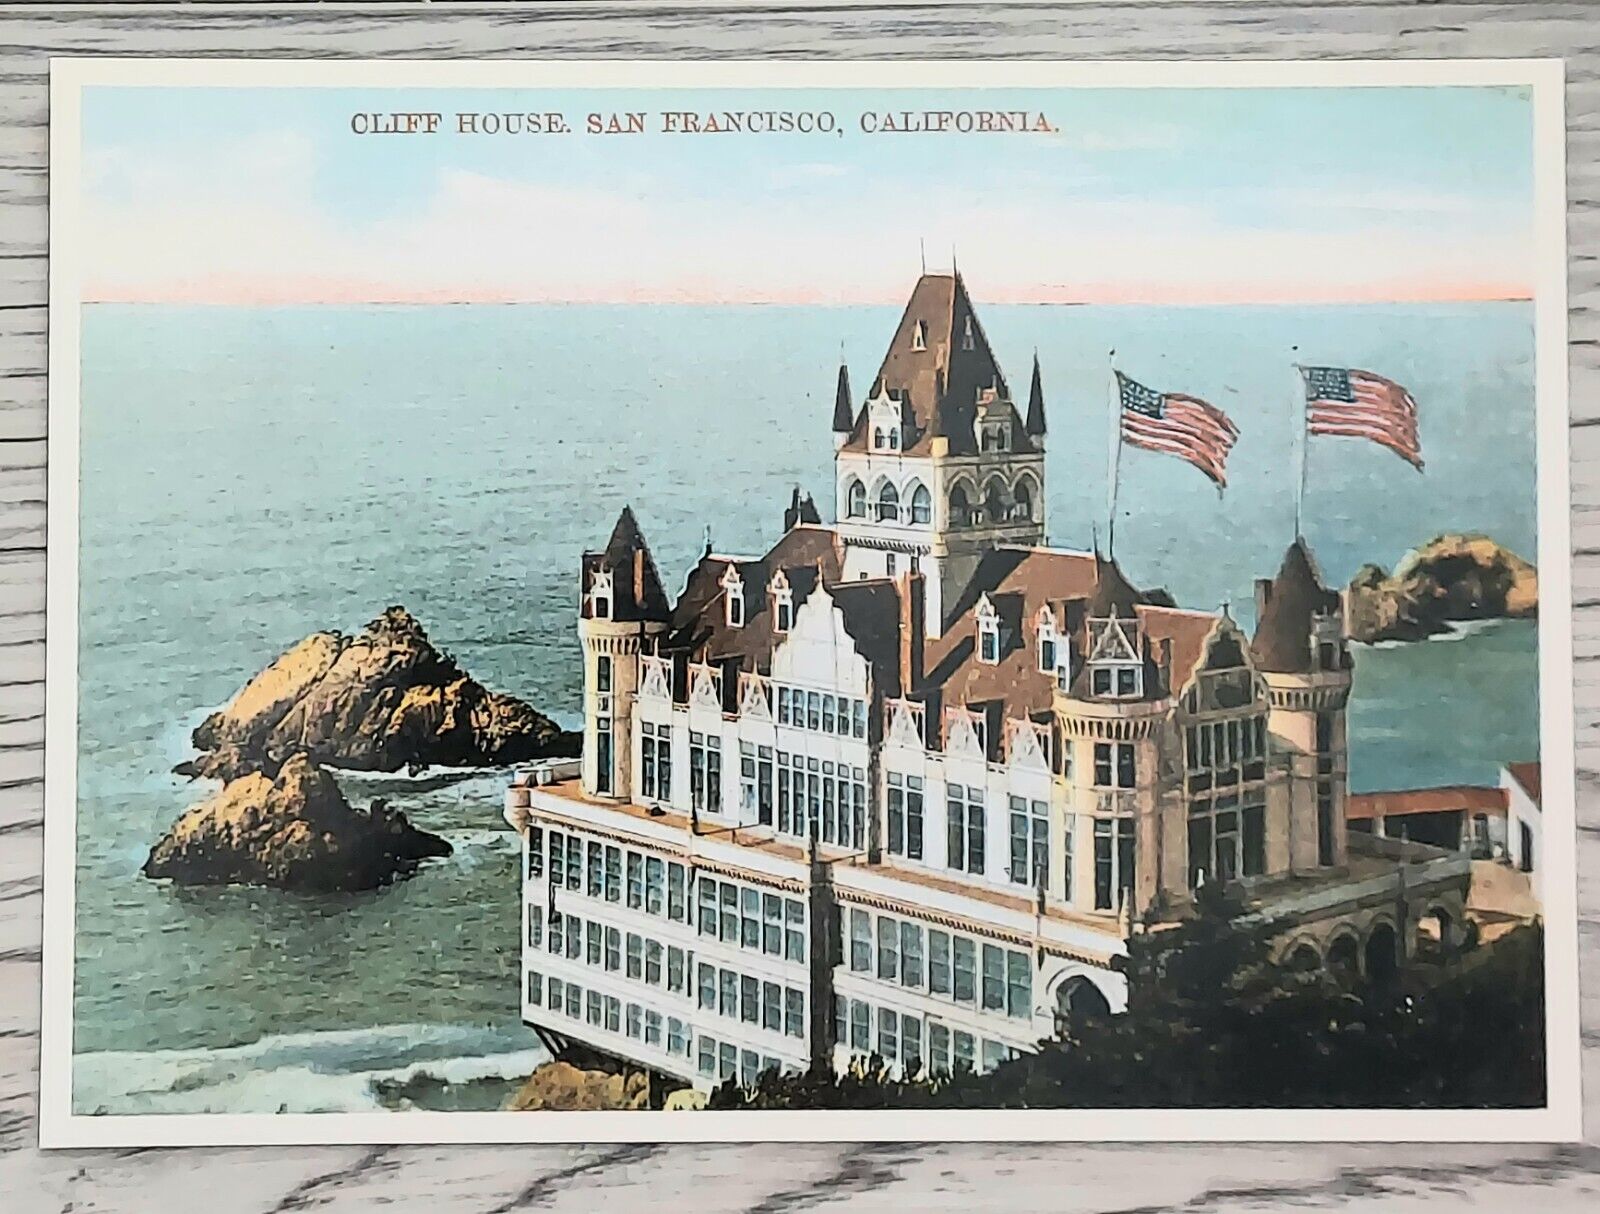 The Third Cliff House 1896-1907 Post Card 1979 View San Francisco New 6x4